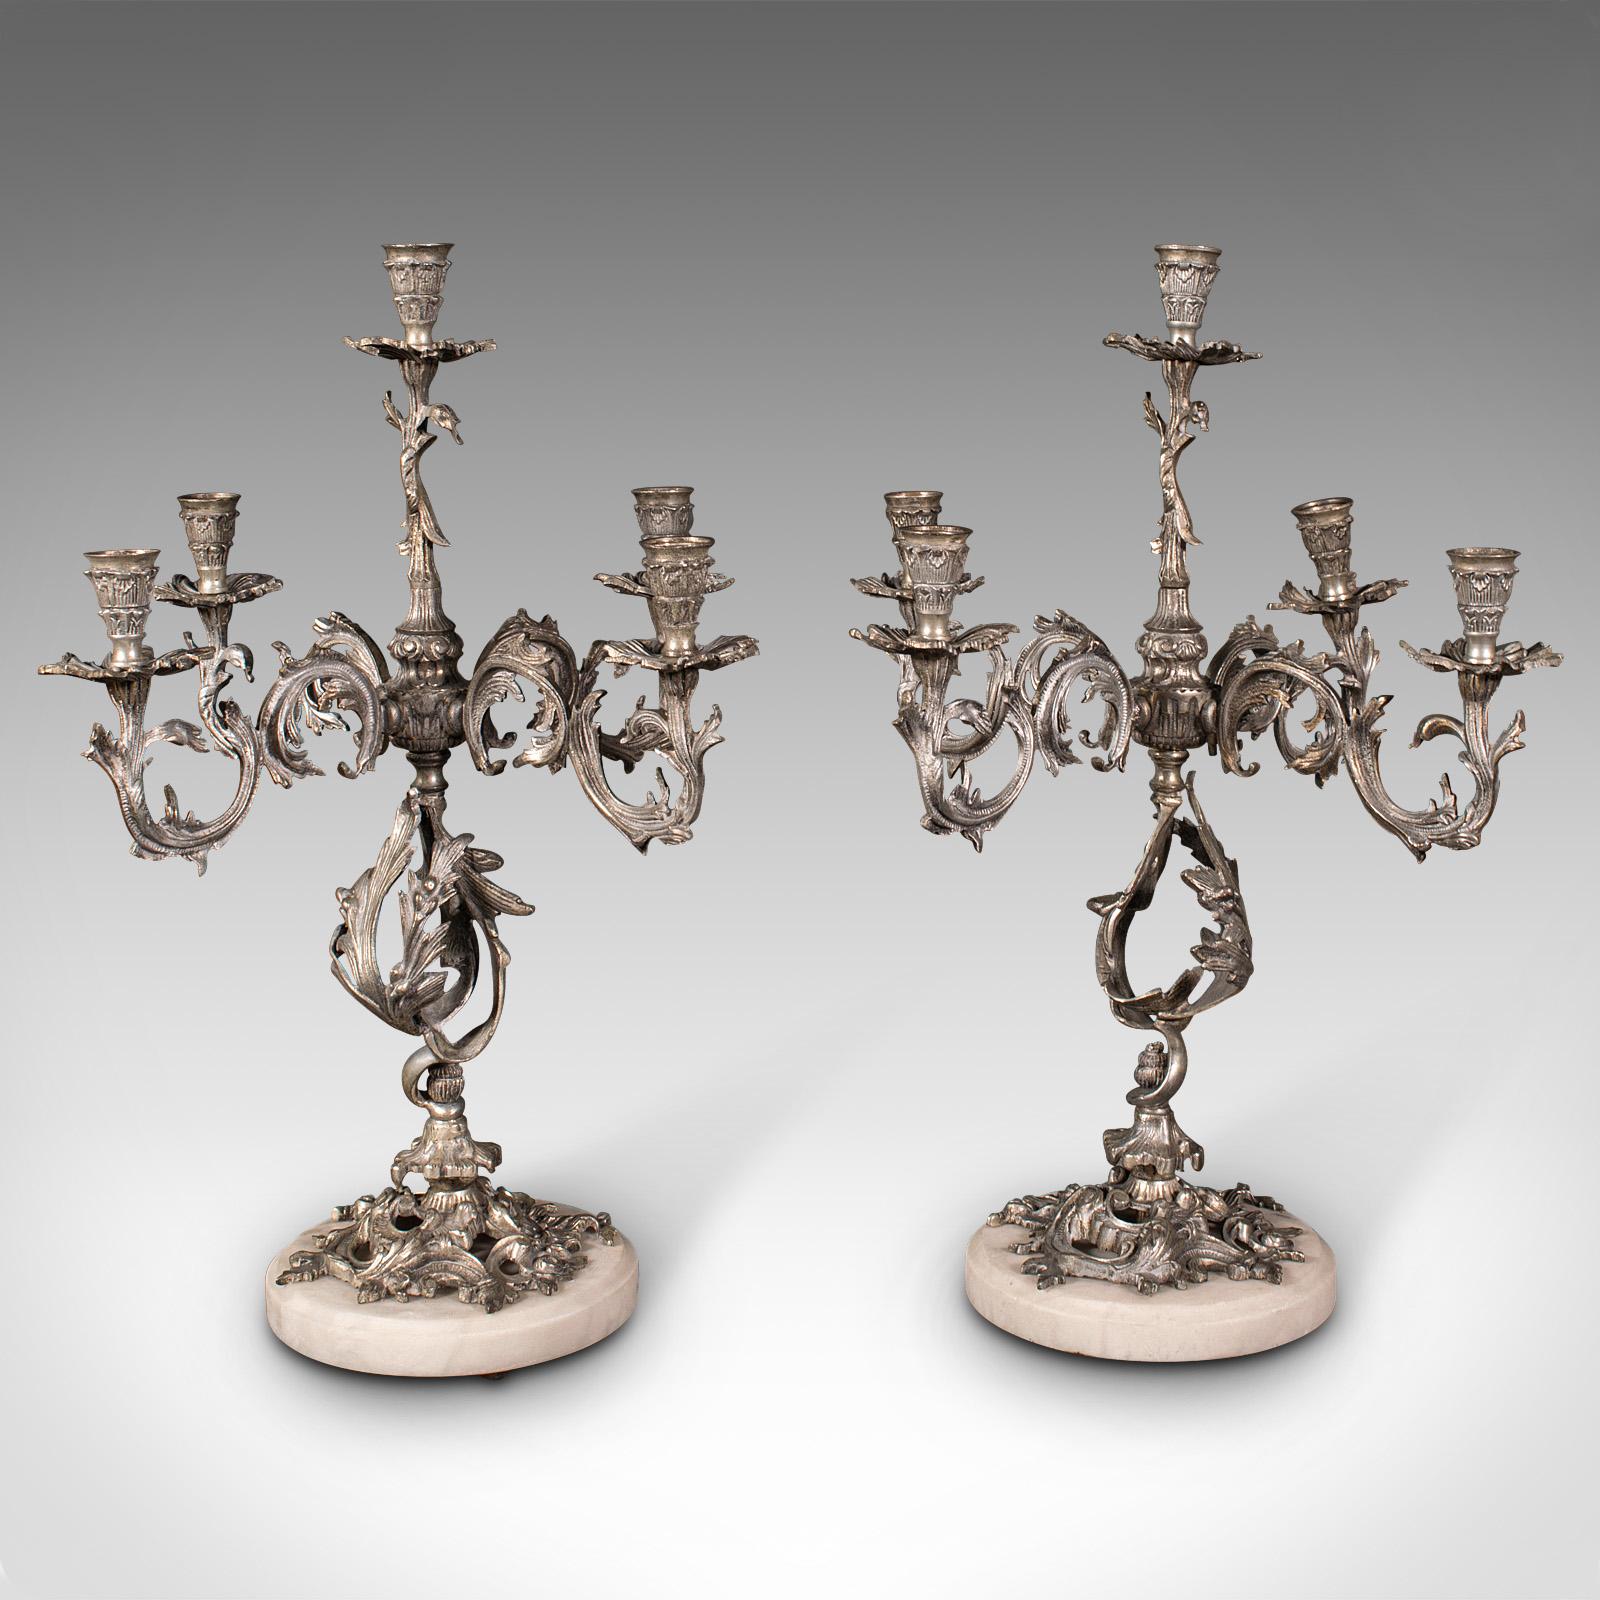 This is a pair of antique decorative candelabra. A French, silver nickel 4-branch centrepiece candlestick, dating to the Edwardian period, circa 1910.

Ornately decorated candelabra with appealing heft
Displaying a desirable aged patina